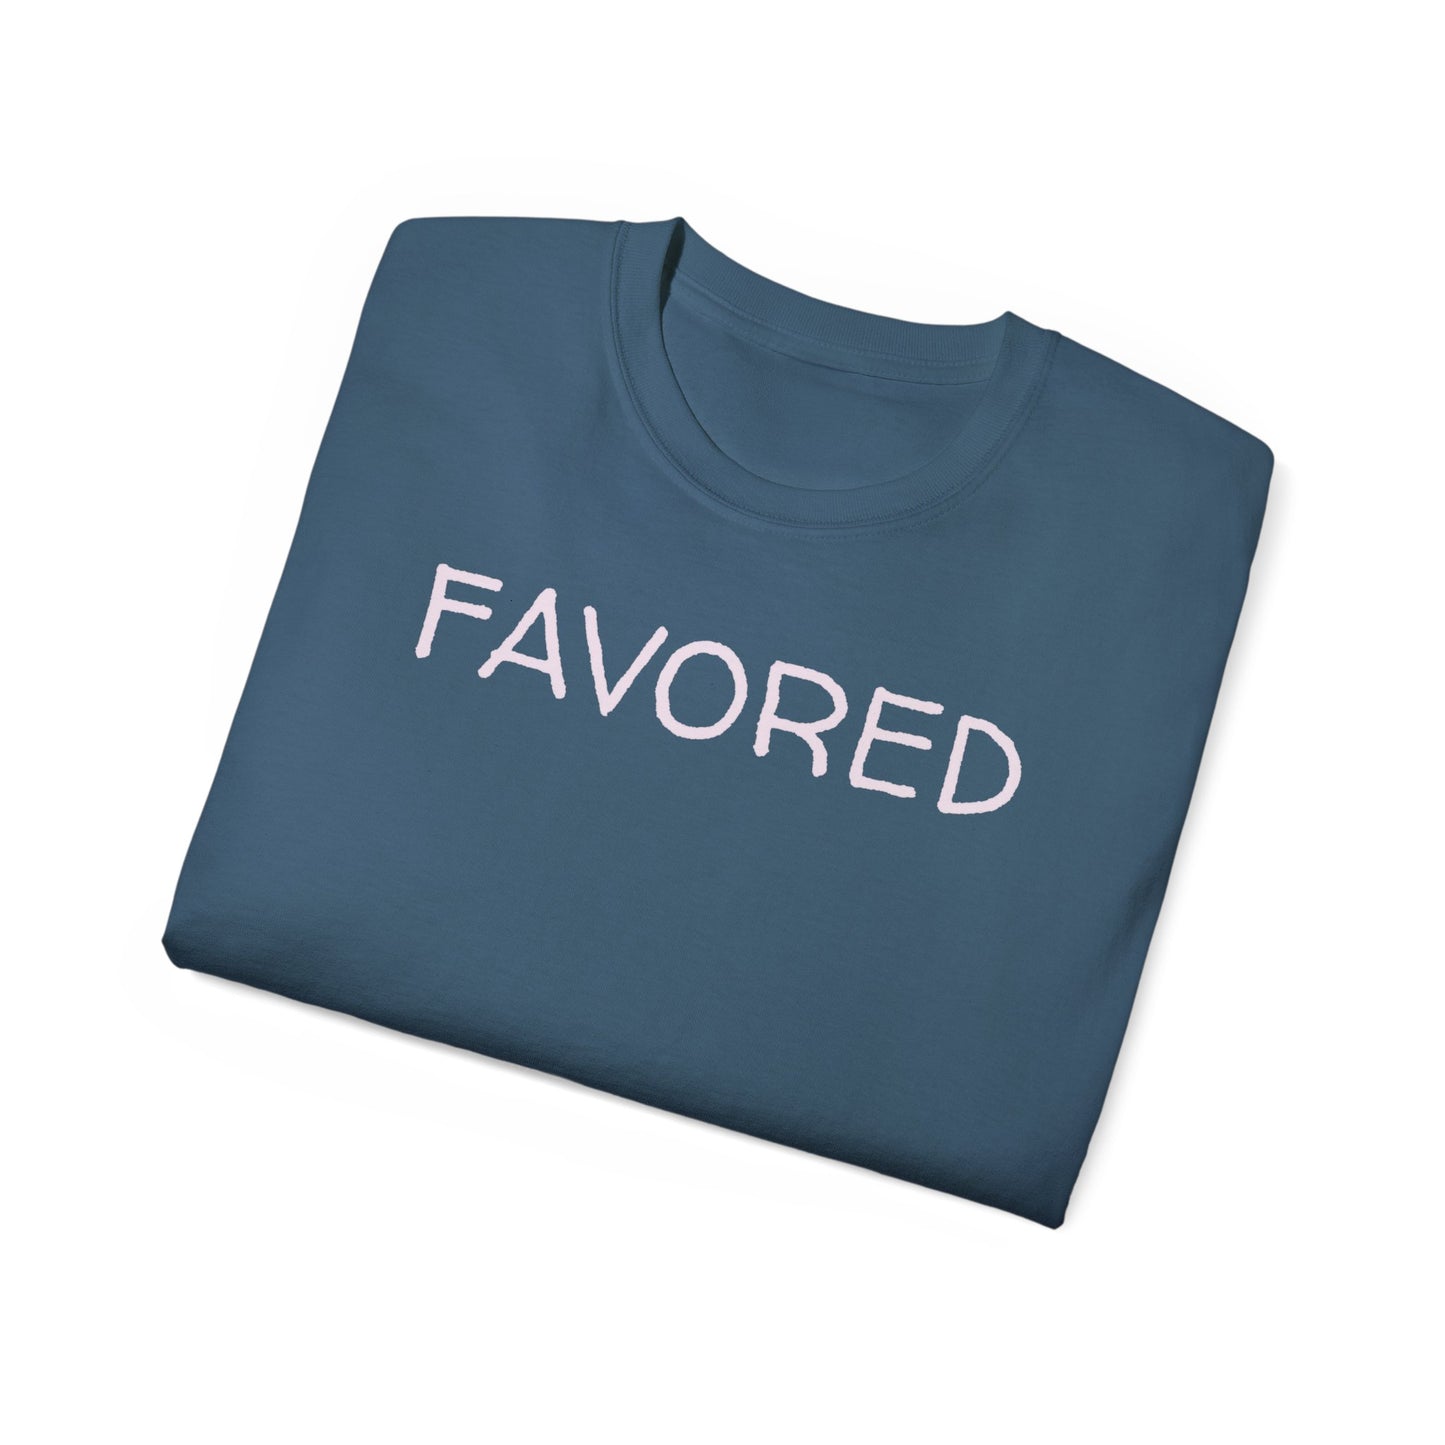 FAVORED Unisex Ultra Cotton Tee with UB>UR in the back